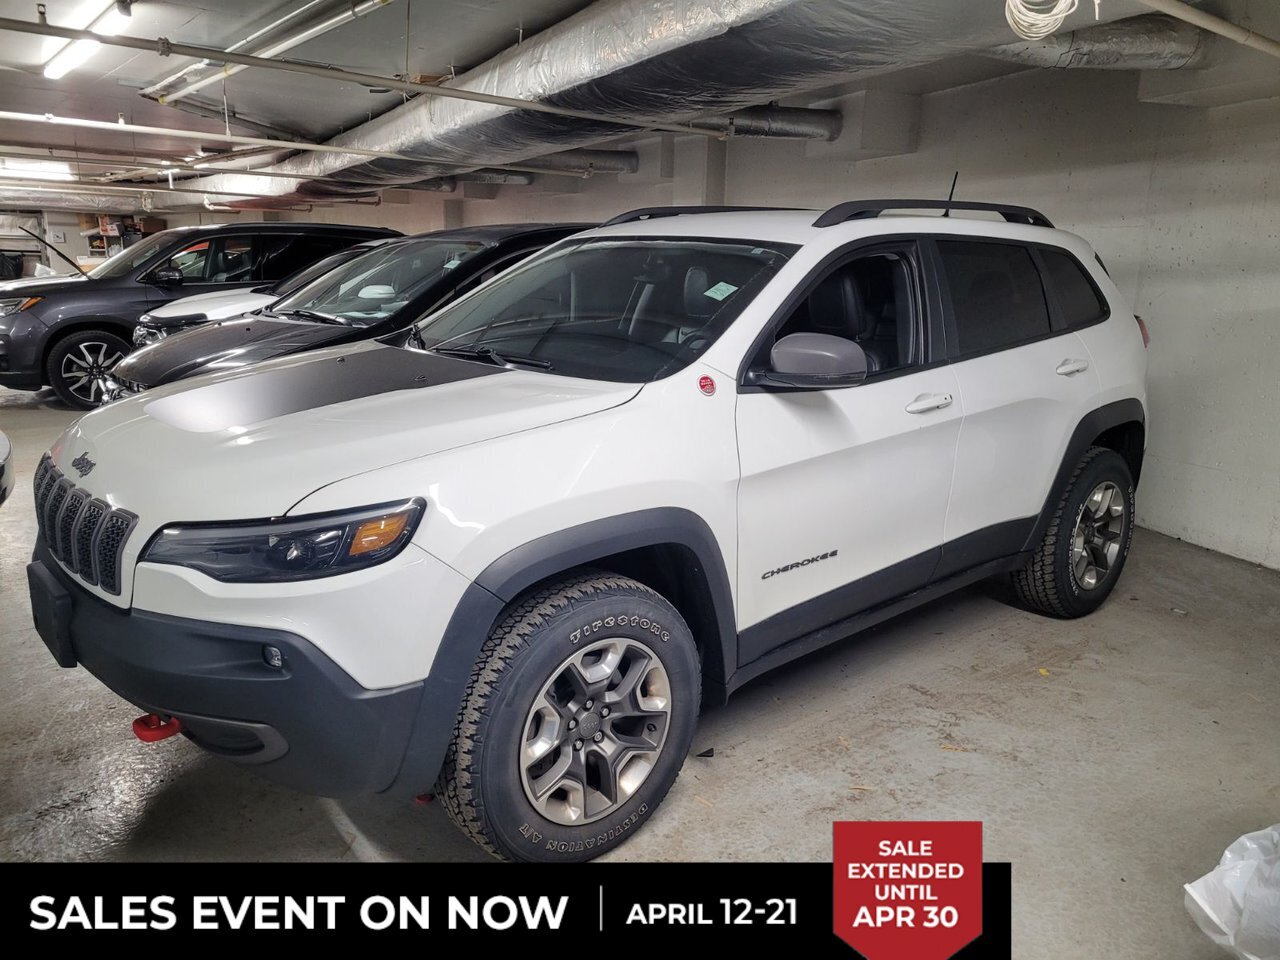 2019 Jeep Cherokee 4x4 Trailhawk V6 3.2L Safety Tec | Cold Weather Gr